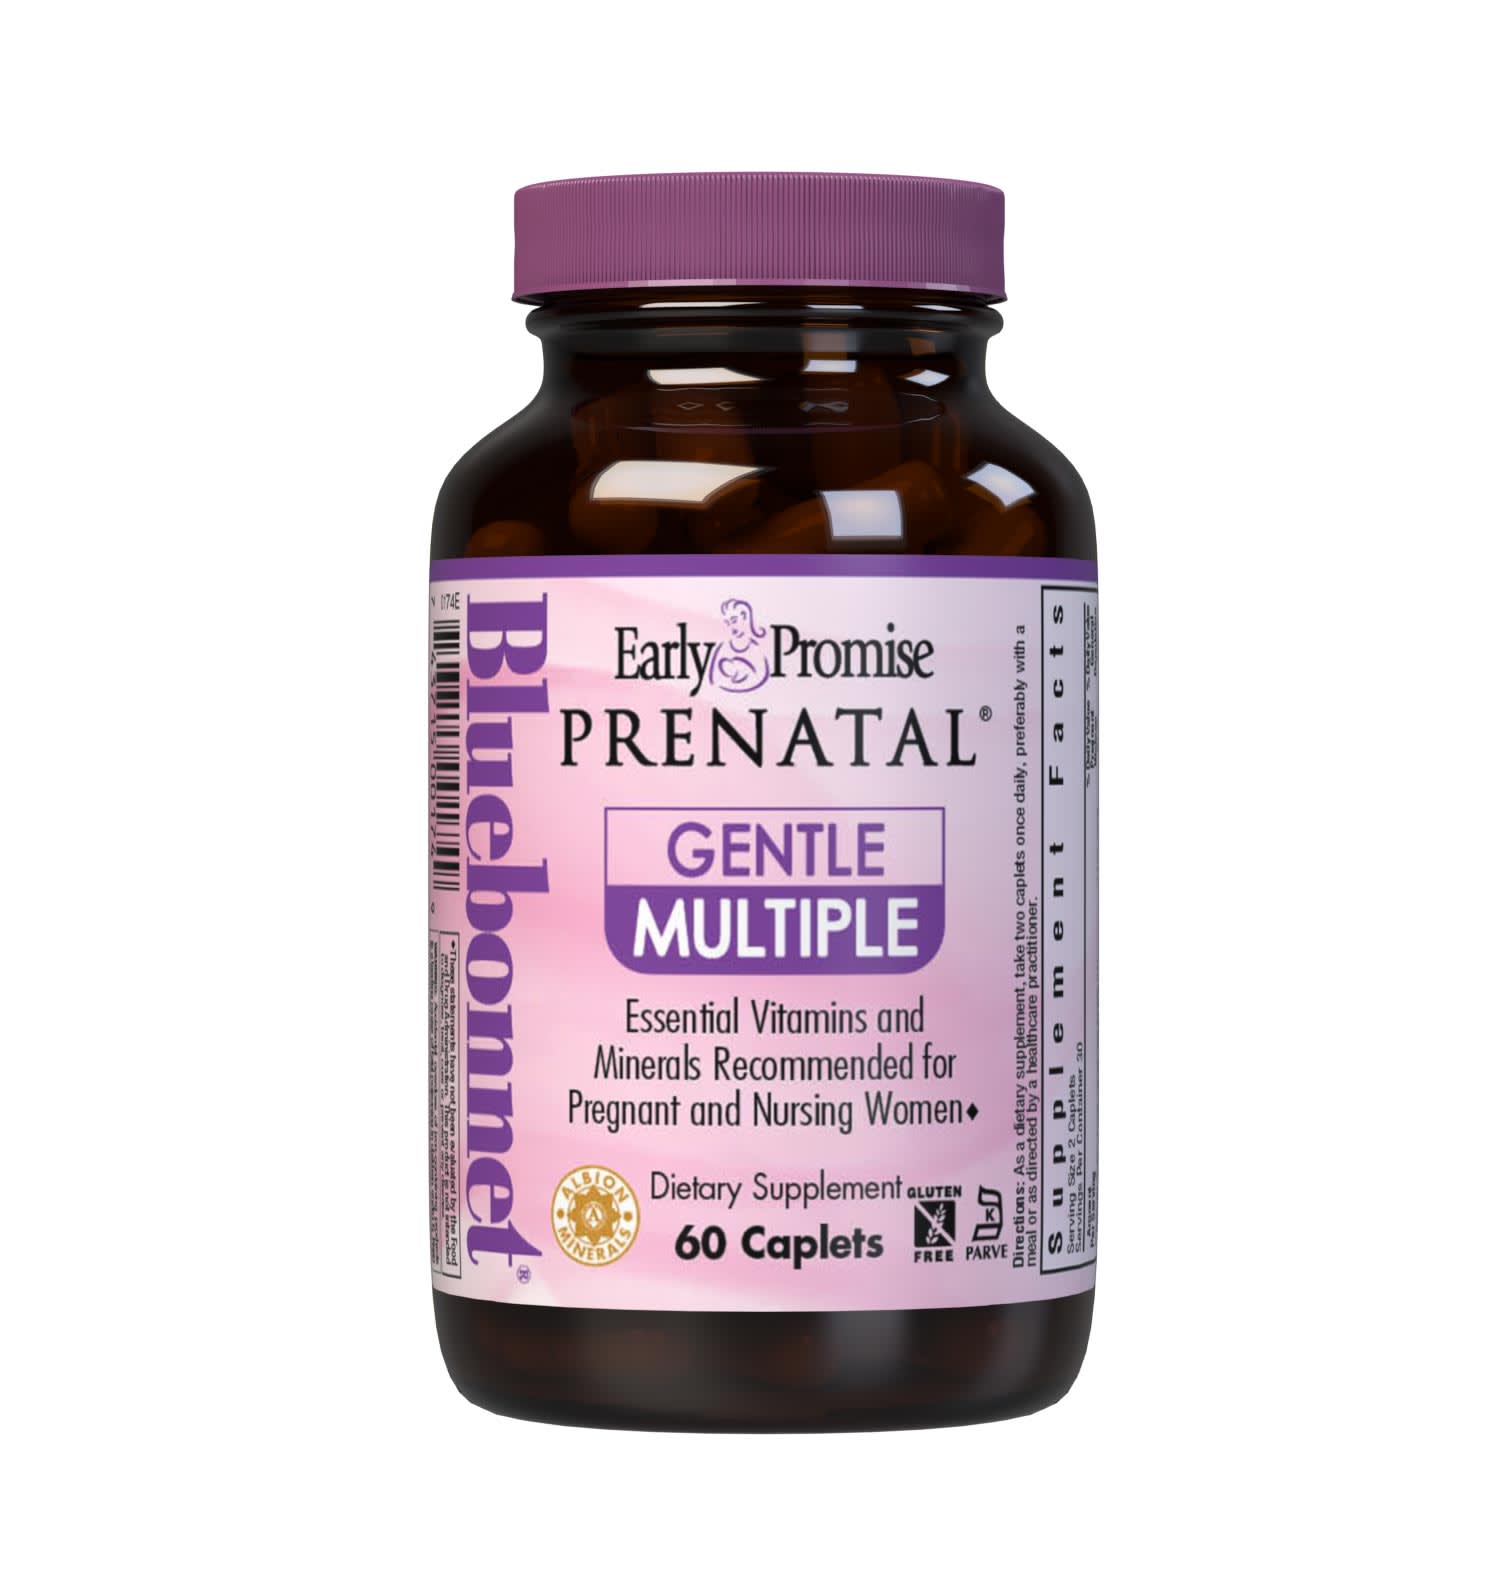 Early Promise Prenatal Gentle Multiple 60 Caplets are formulated with responsible levels of nutrients based on what the scientific community has agreed as optimum for pregnant and nursing women. This gentle, scientific formula are formulated with at least 100% of all the essential vitamins for pregnant/lactating women from sources known to be gentle on mom’s sensitive GI as well as providing nearly 100% of all the essential macro- and microminerals. #size_60 count